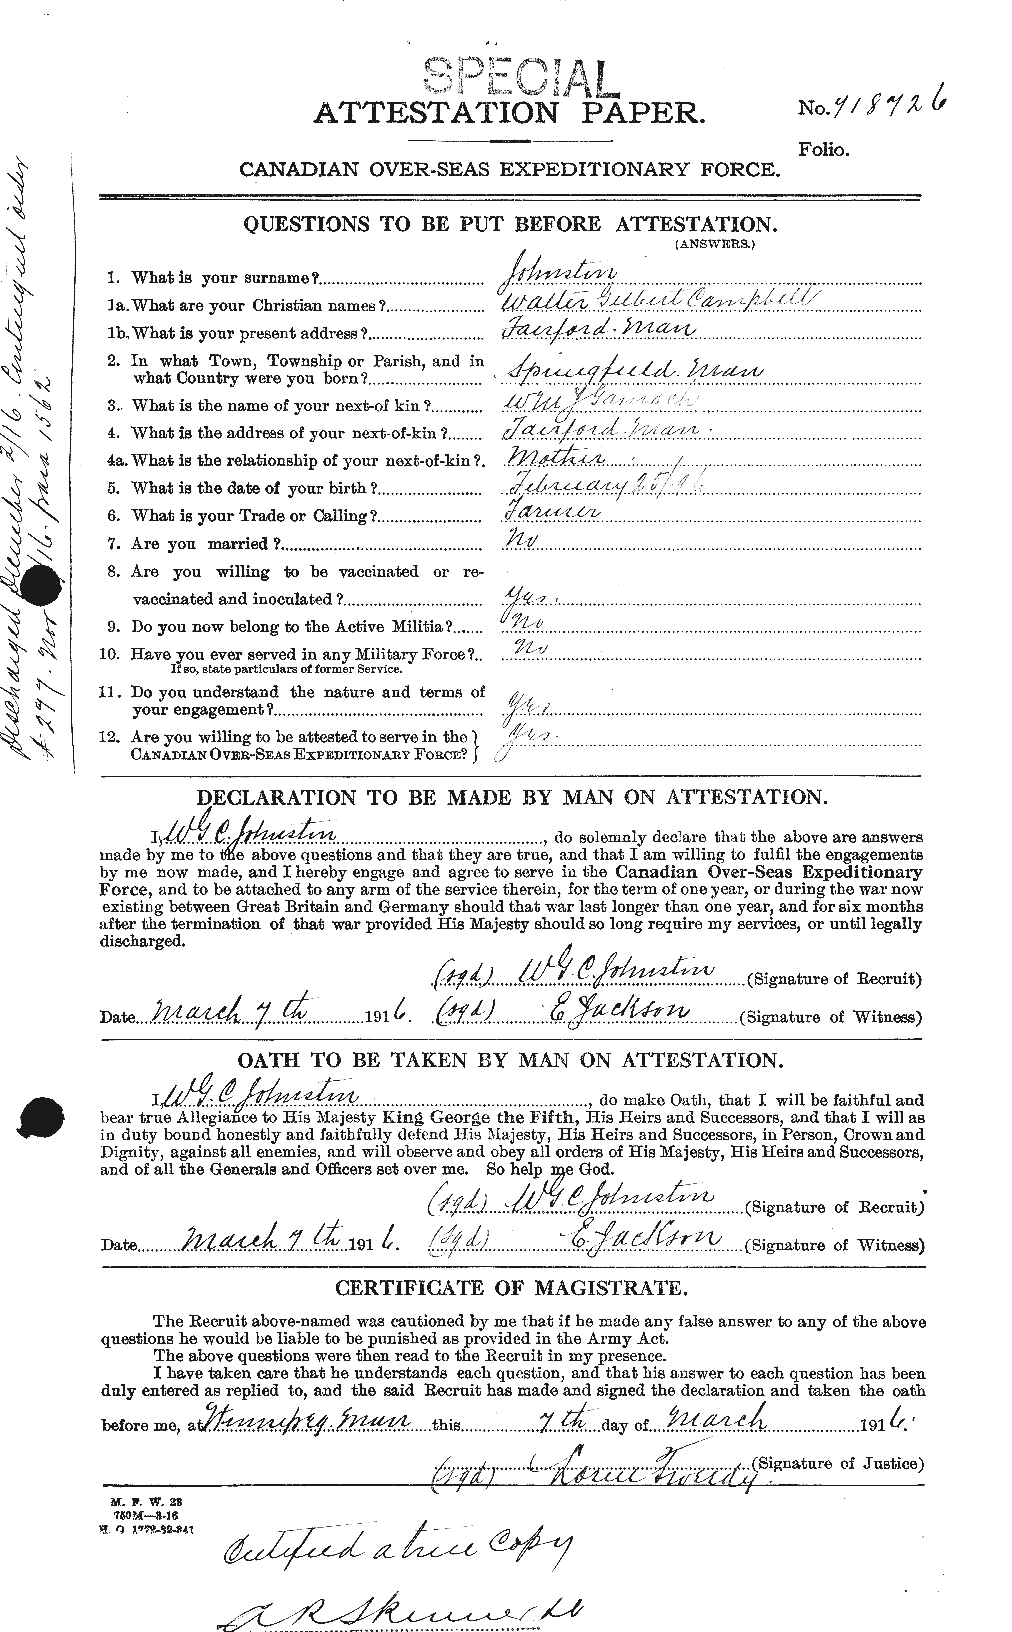 Personnel Records of the First World War - CEF 427204a